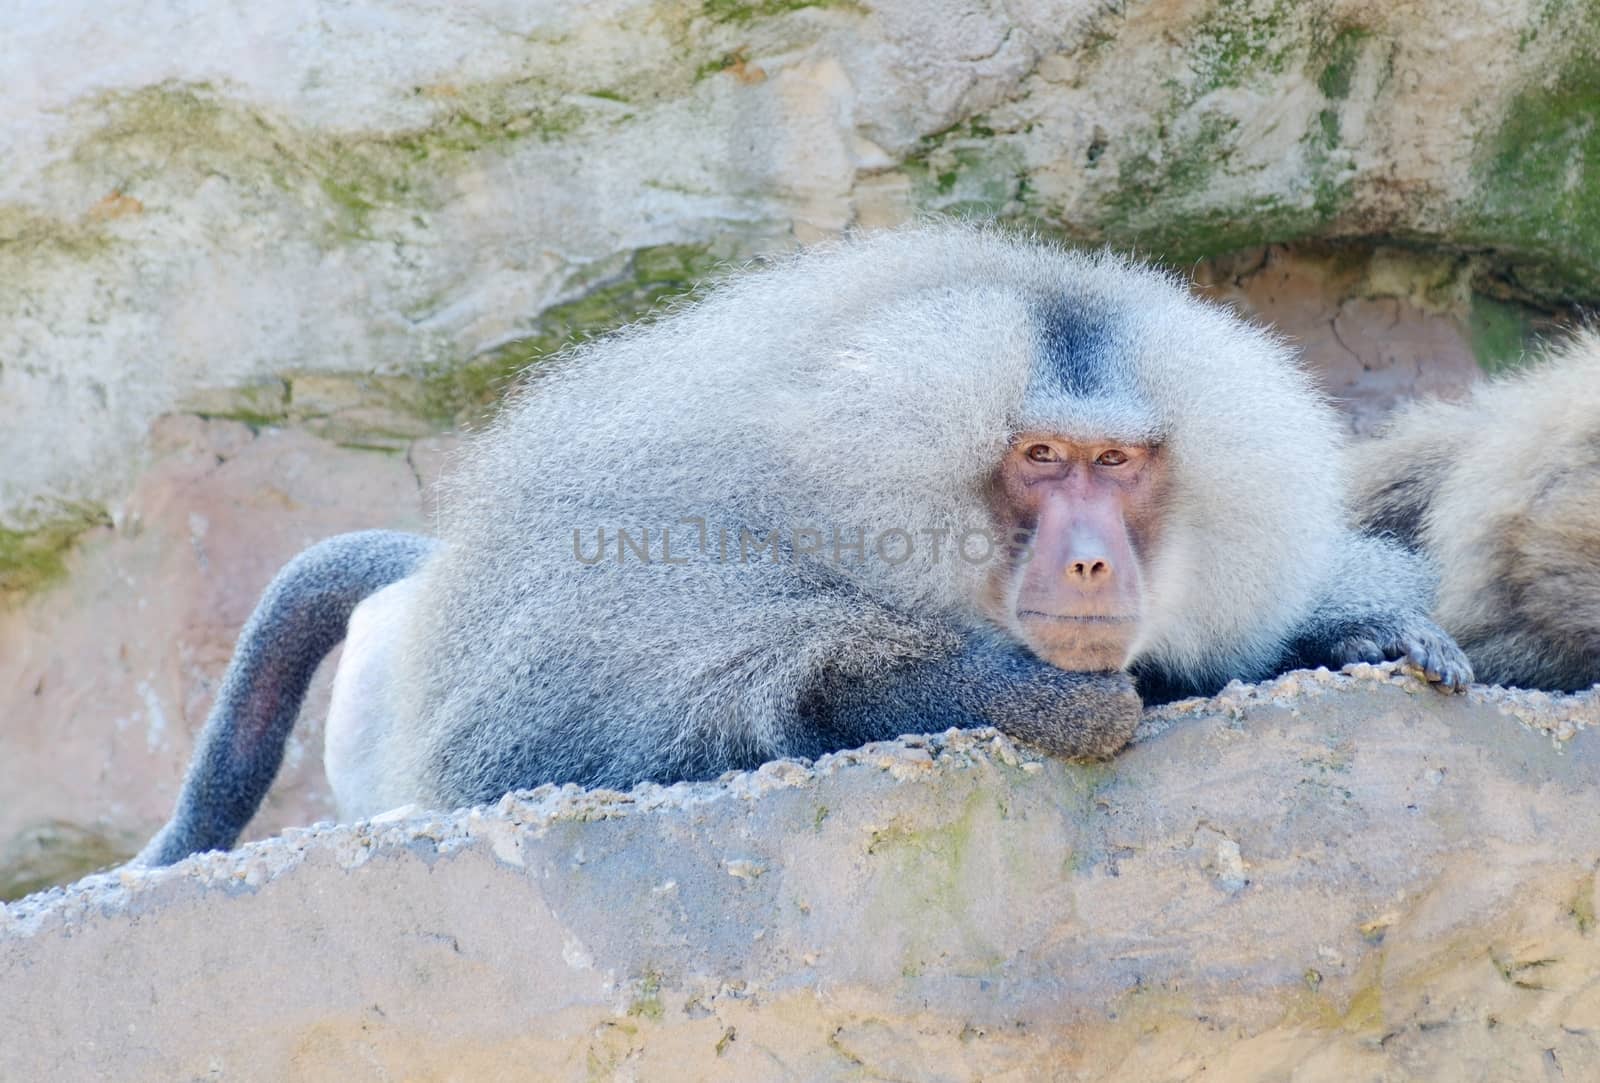 Baboon by kmwphotography